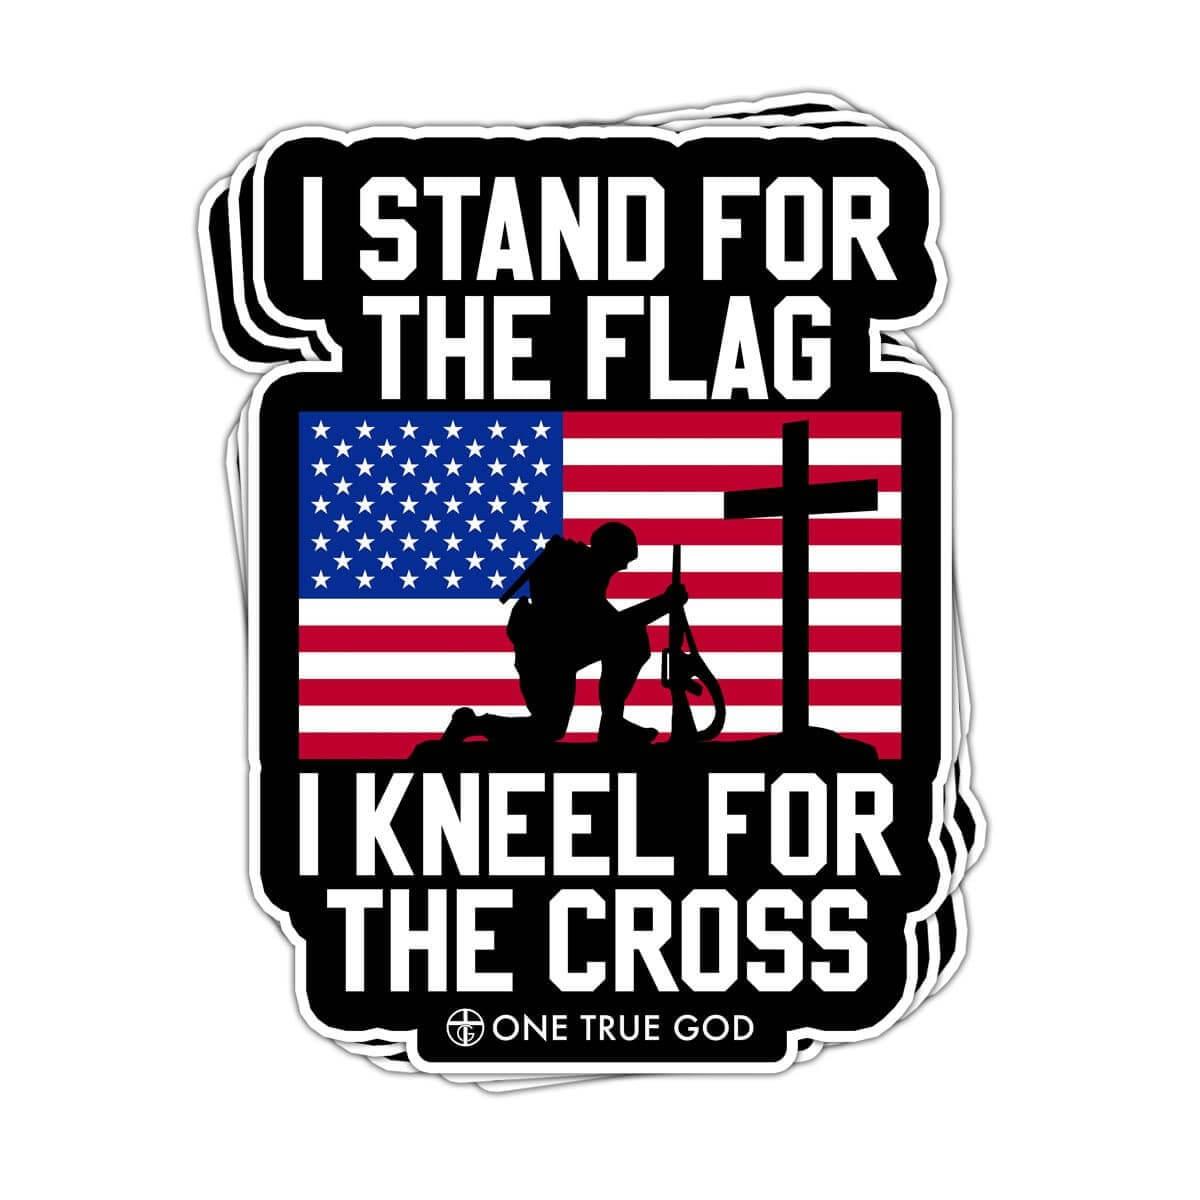 I Stand for the Flag Decals